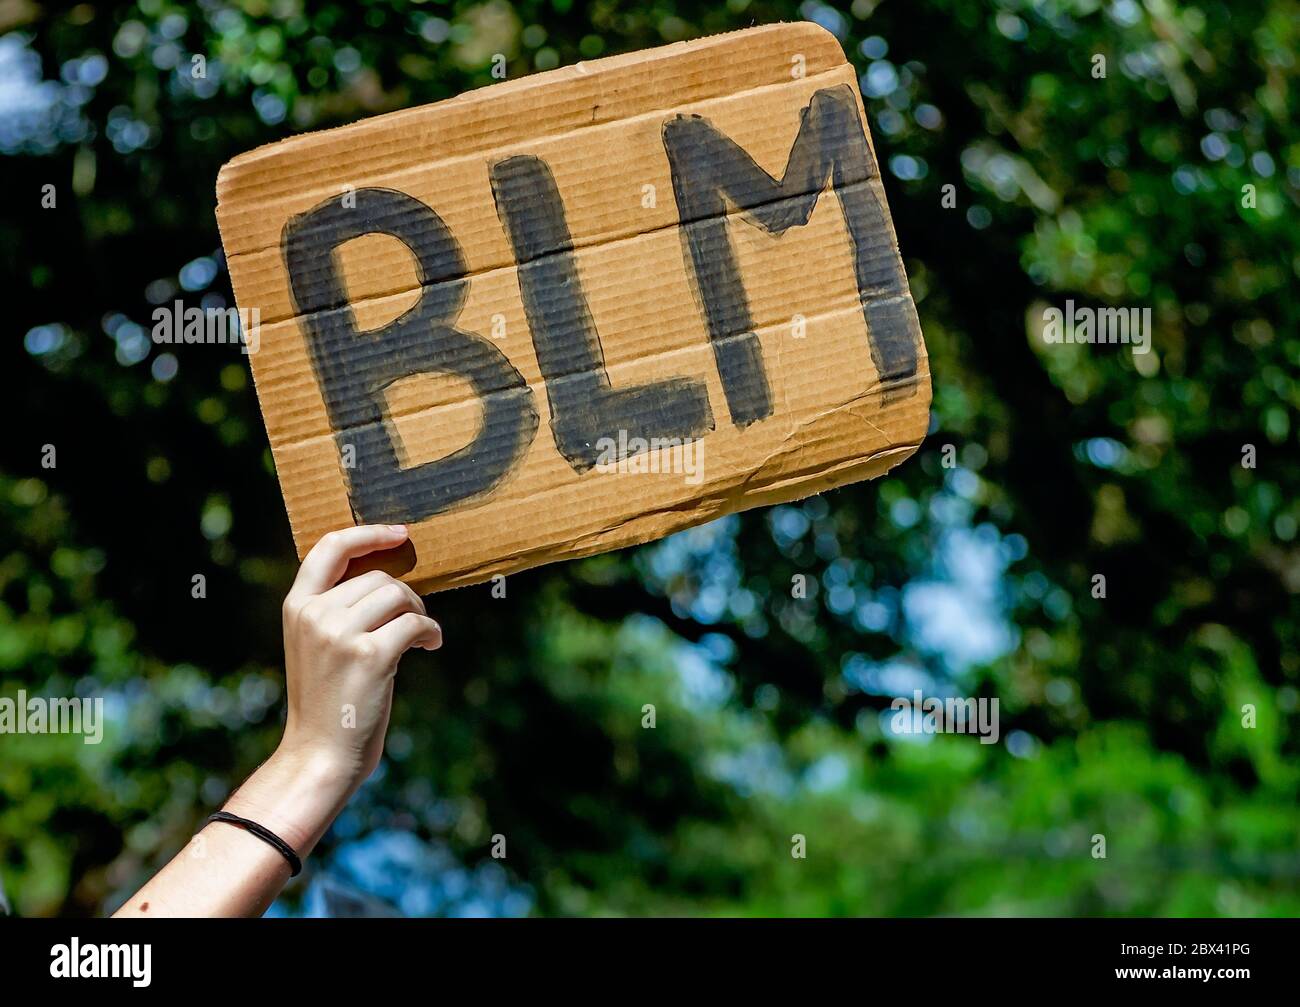 A protestor waves a Black Lives Matter sign while at a protest against police brutality, June 4, 2020, at Memorial Park in Mobile, Alabama. Stock Photo